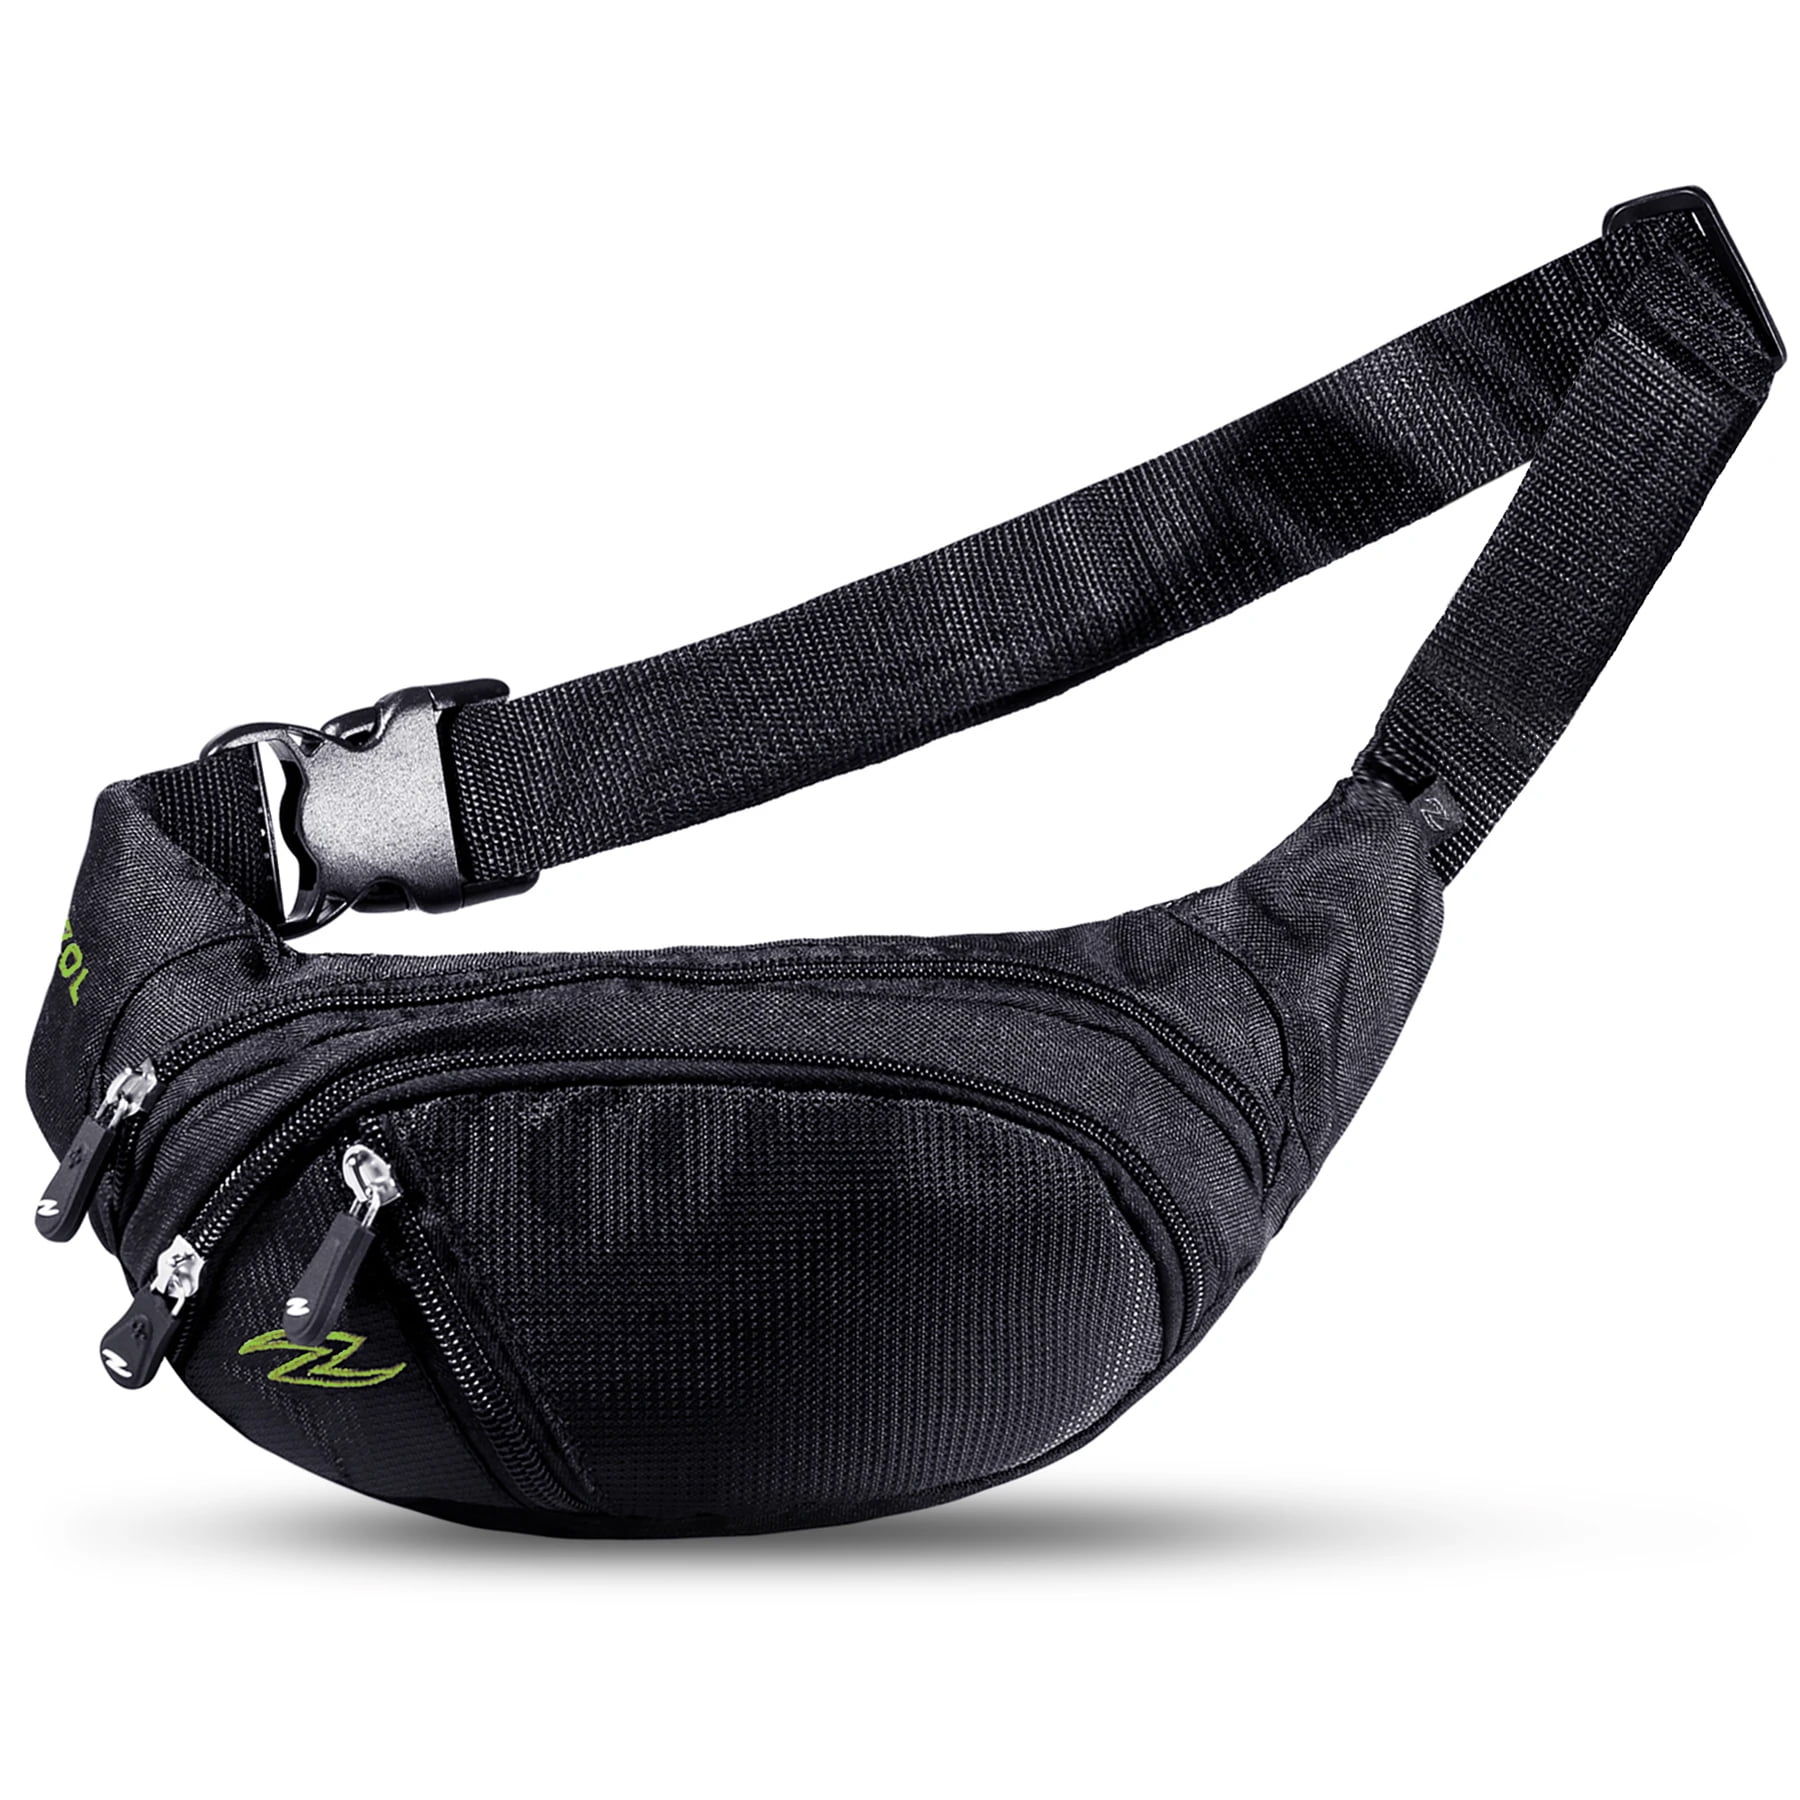 Lovollect Black Fanny Pack Waist Bag for